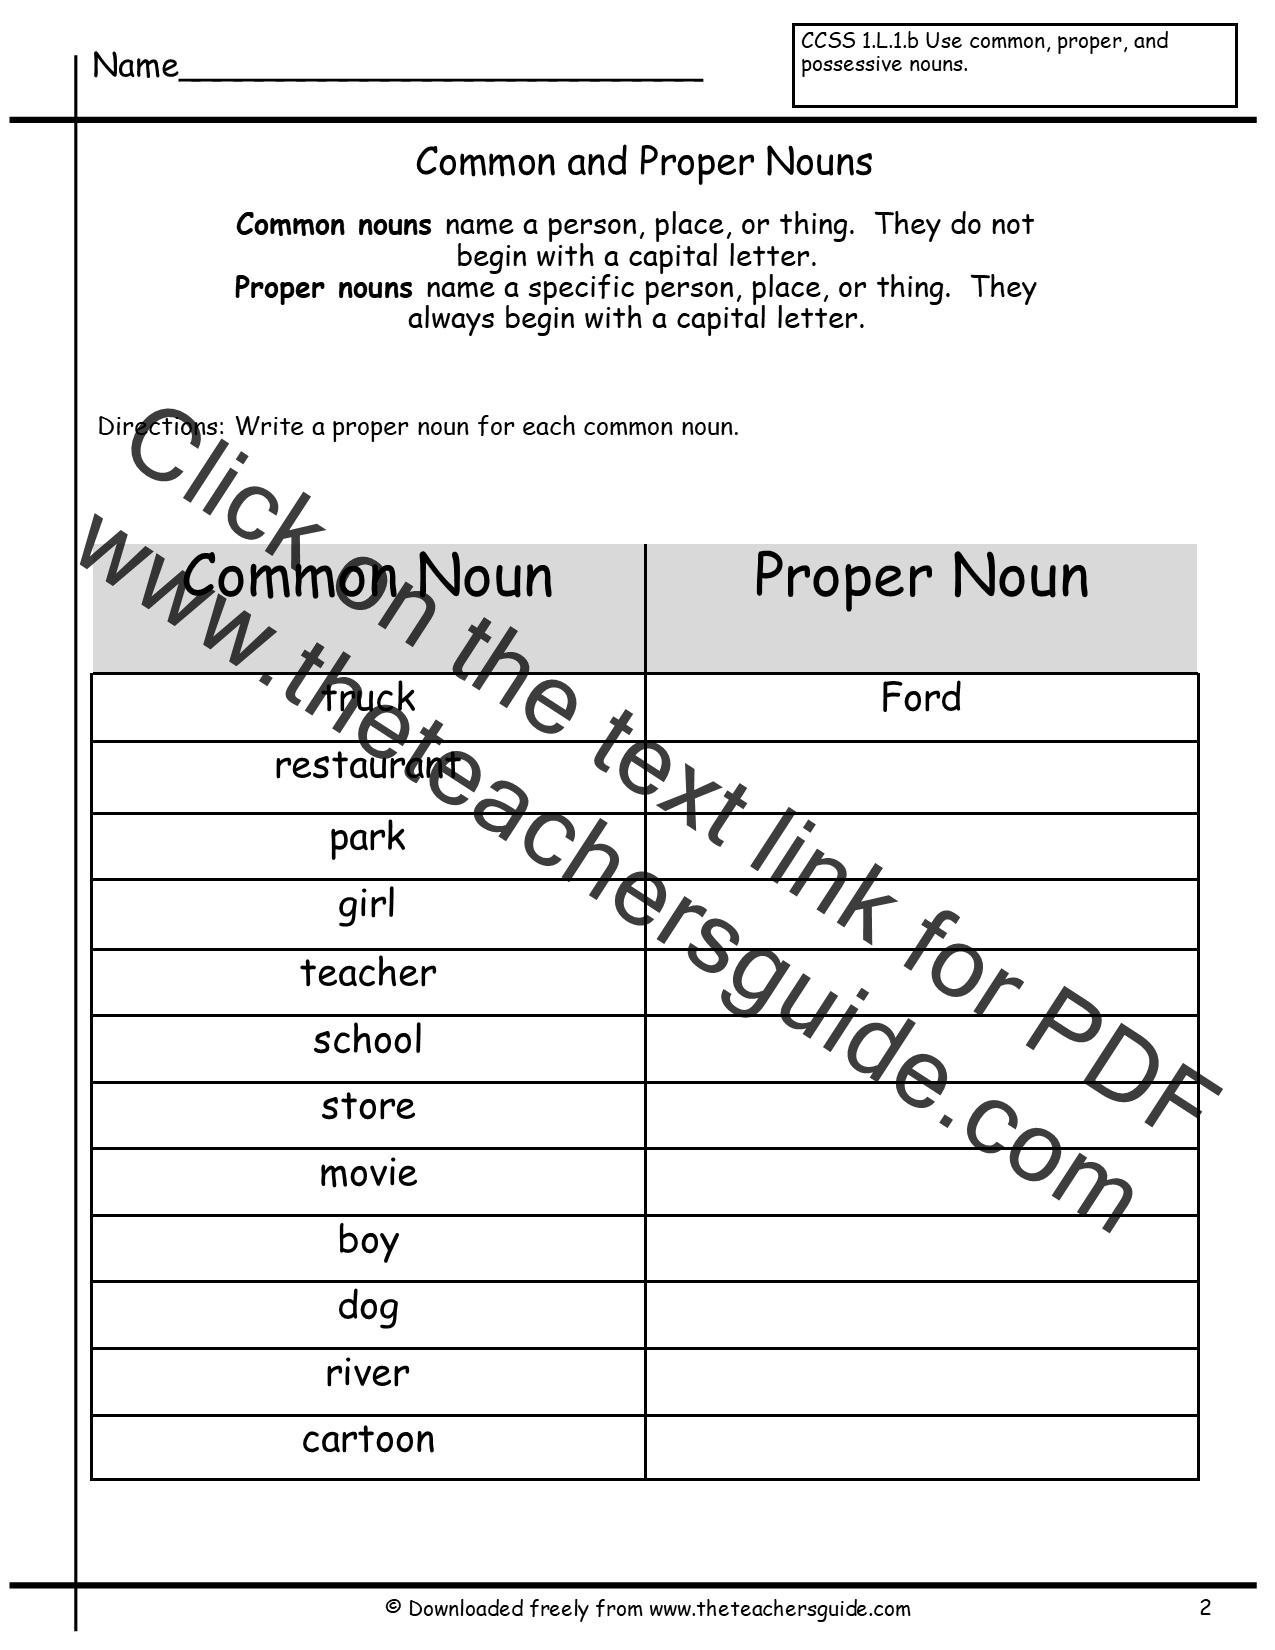 Common And Proper Nouns Worksheets From The Teacher s Guide